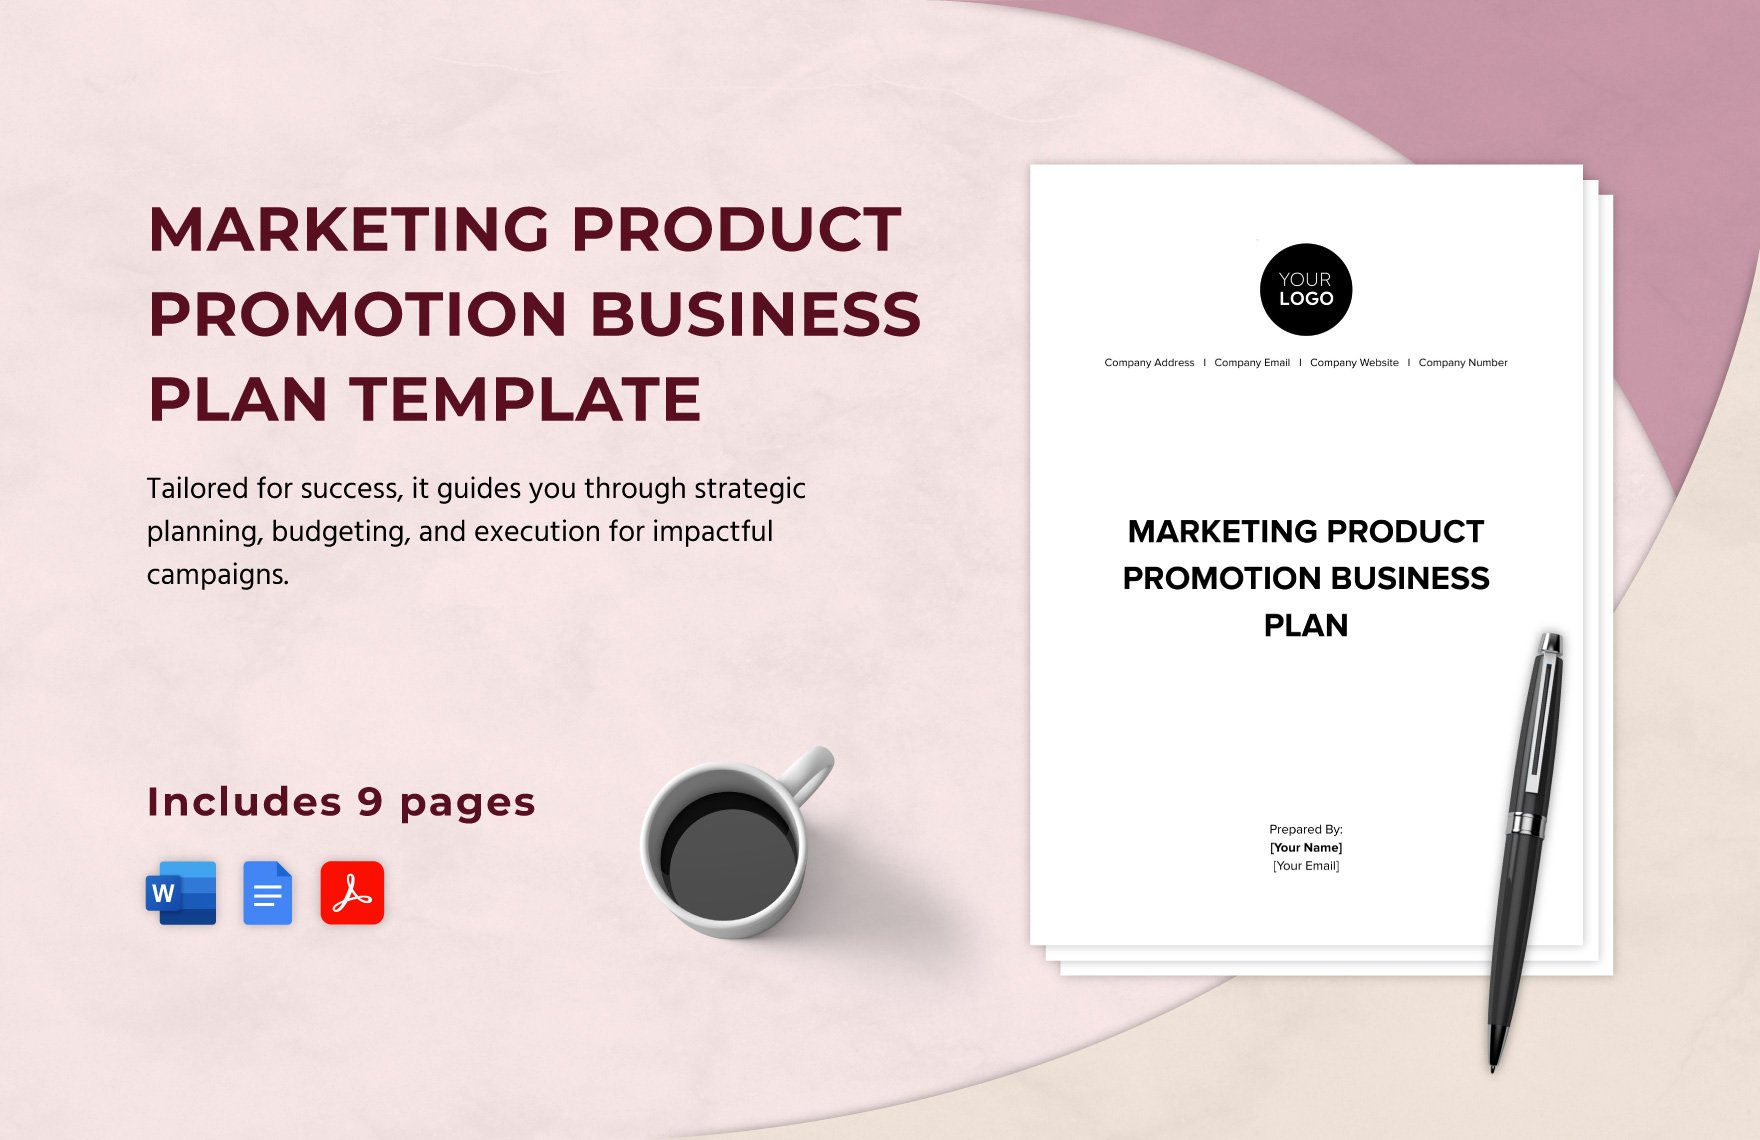 Marketing Product Promotion Business Plan Template